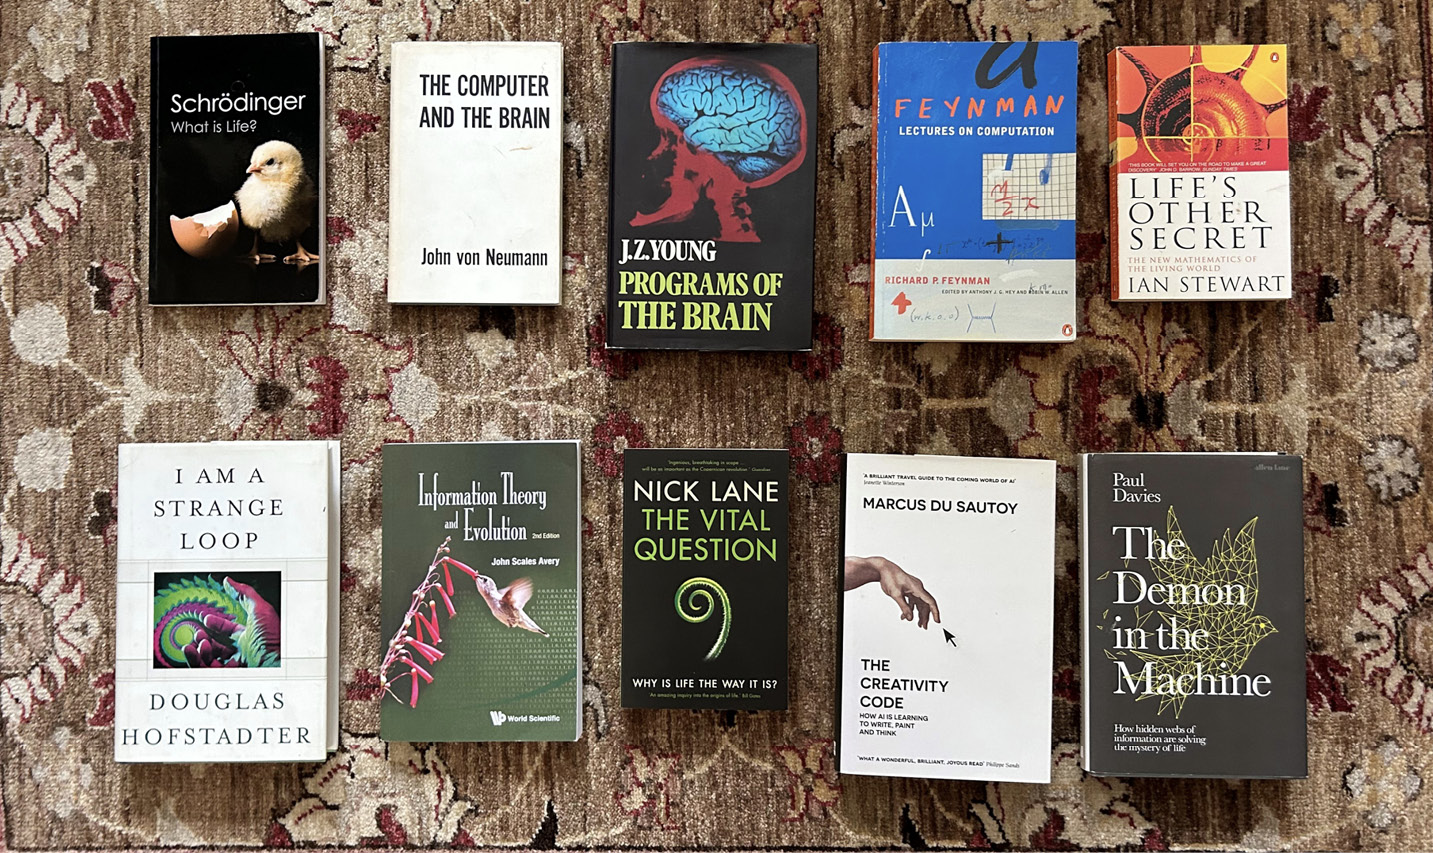 An image of ten books laid out in two rows of five. Top row, left to right: 1944–Erwin Schrödinger: What Is Life?, 1956–John von Neumann: The Computer and the Brain, 1978–John Zachary Young: Programs of the Brain, 1996–Richard Feynman: Feynman Lectures on Computation, 1998–Ian Stewart: Life’s Other Secret. Bottom row, left to right: 2007–Douglas Hofstadter: I Am a Strange Loop, 2012–John Scales Avery: Information Theory and Evolution, 2015–Nick Lane: The Vital Question, 2019–Marcus du Sautoy: The Creativity Code, 2020–Paul Davies: The Demon in the Machine.